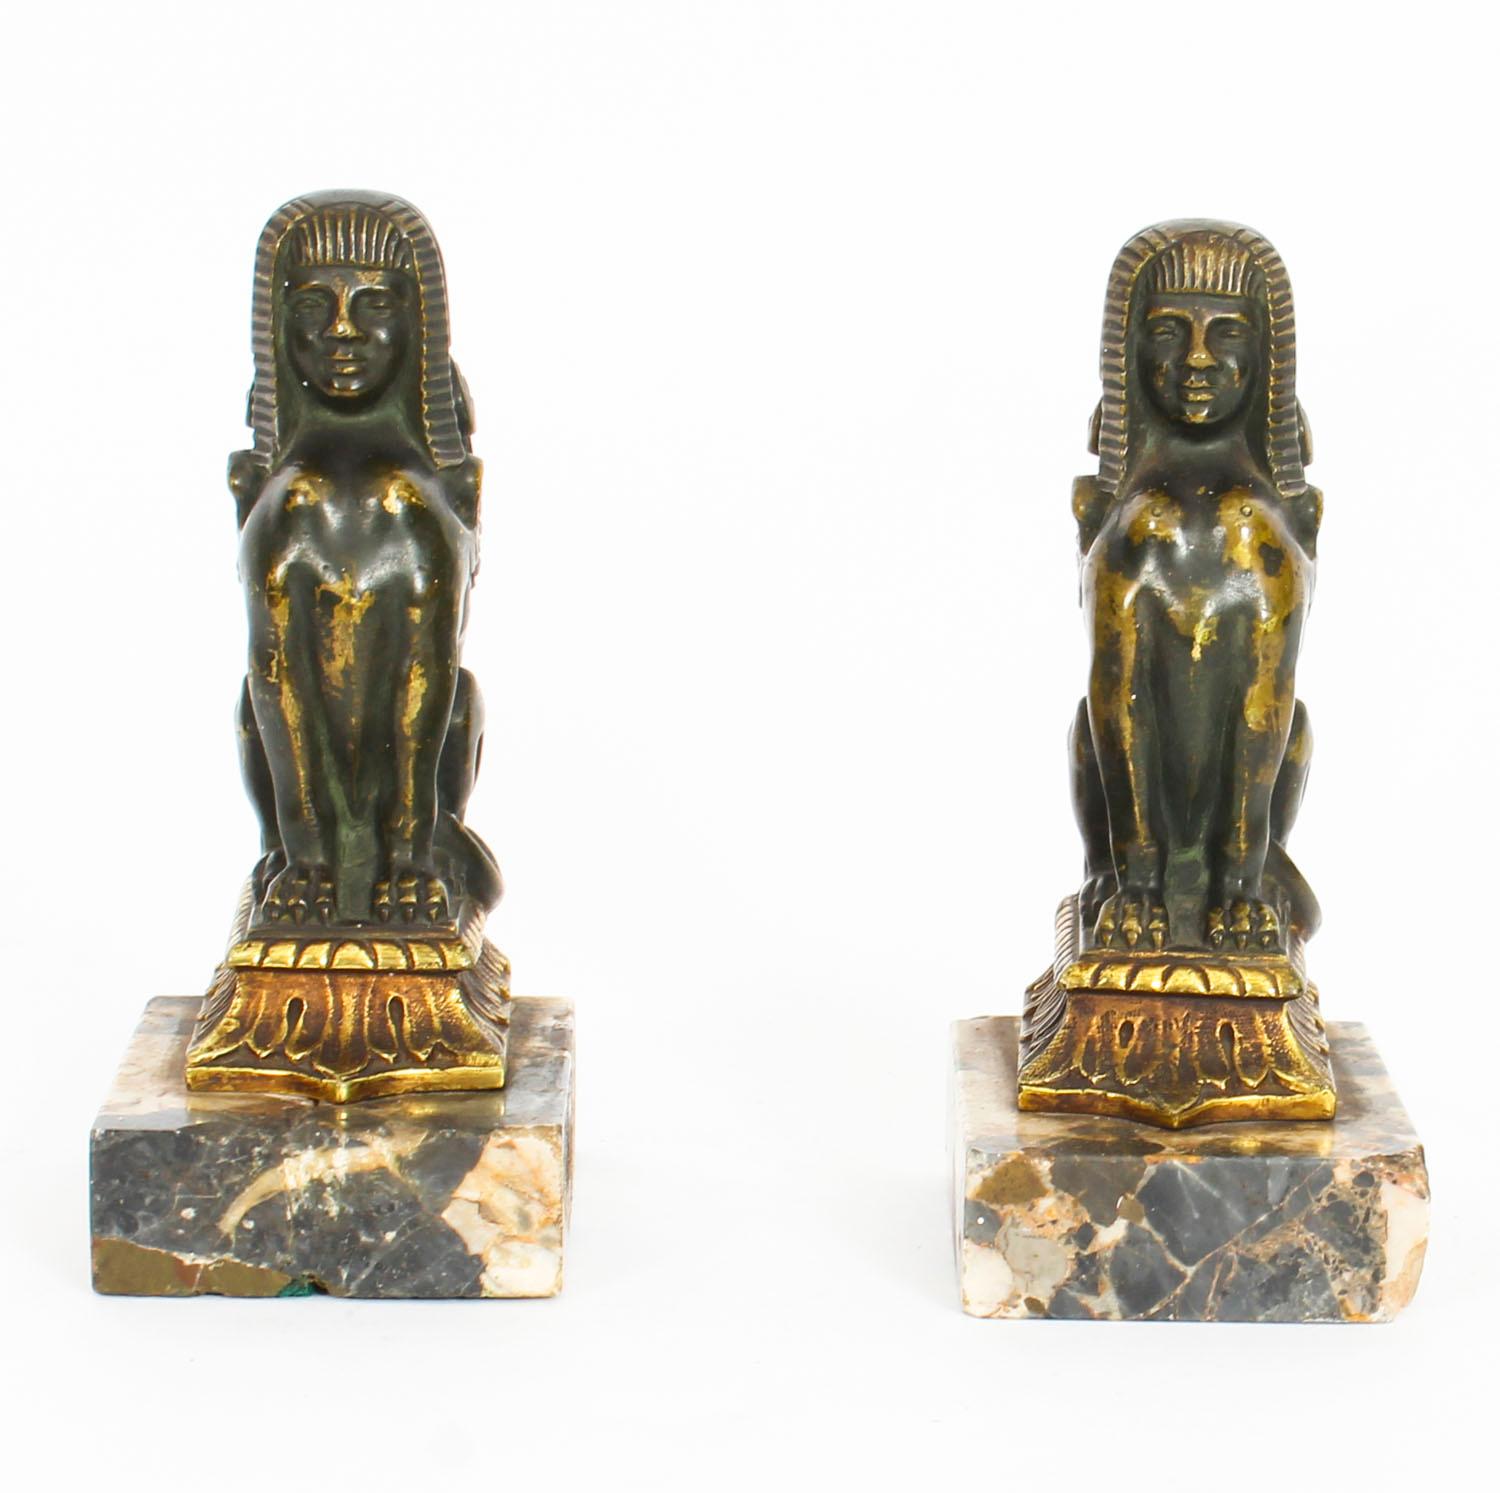 This is a stunning antique pair of 19th century parcel-gilt and dark patinated bronze library bookends, circa 1860 in date.

These exceptionally sculptured bronzes are each cast as a sphinx and set on marble bases.

These high-quality hot cast